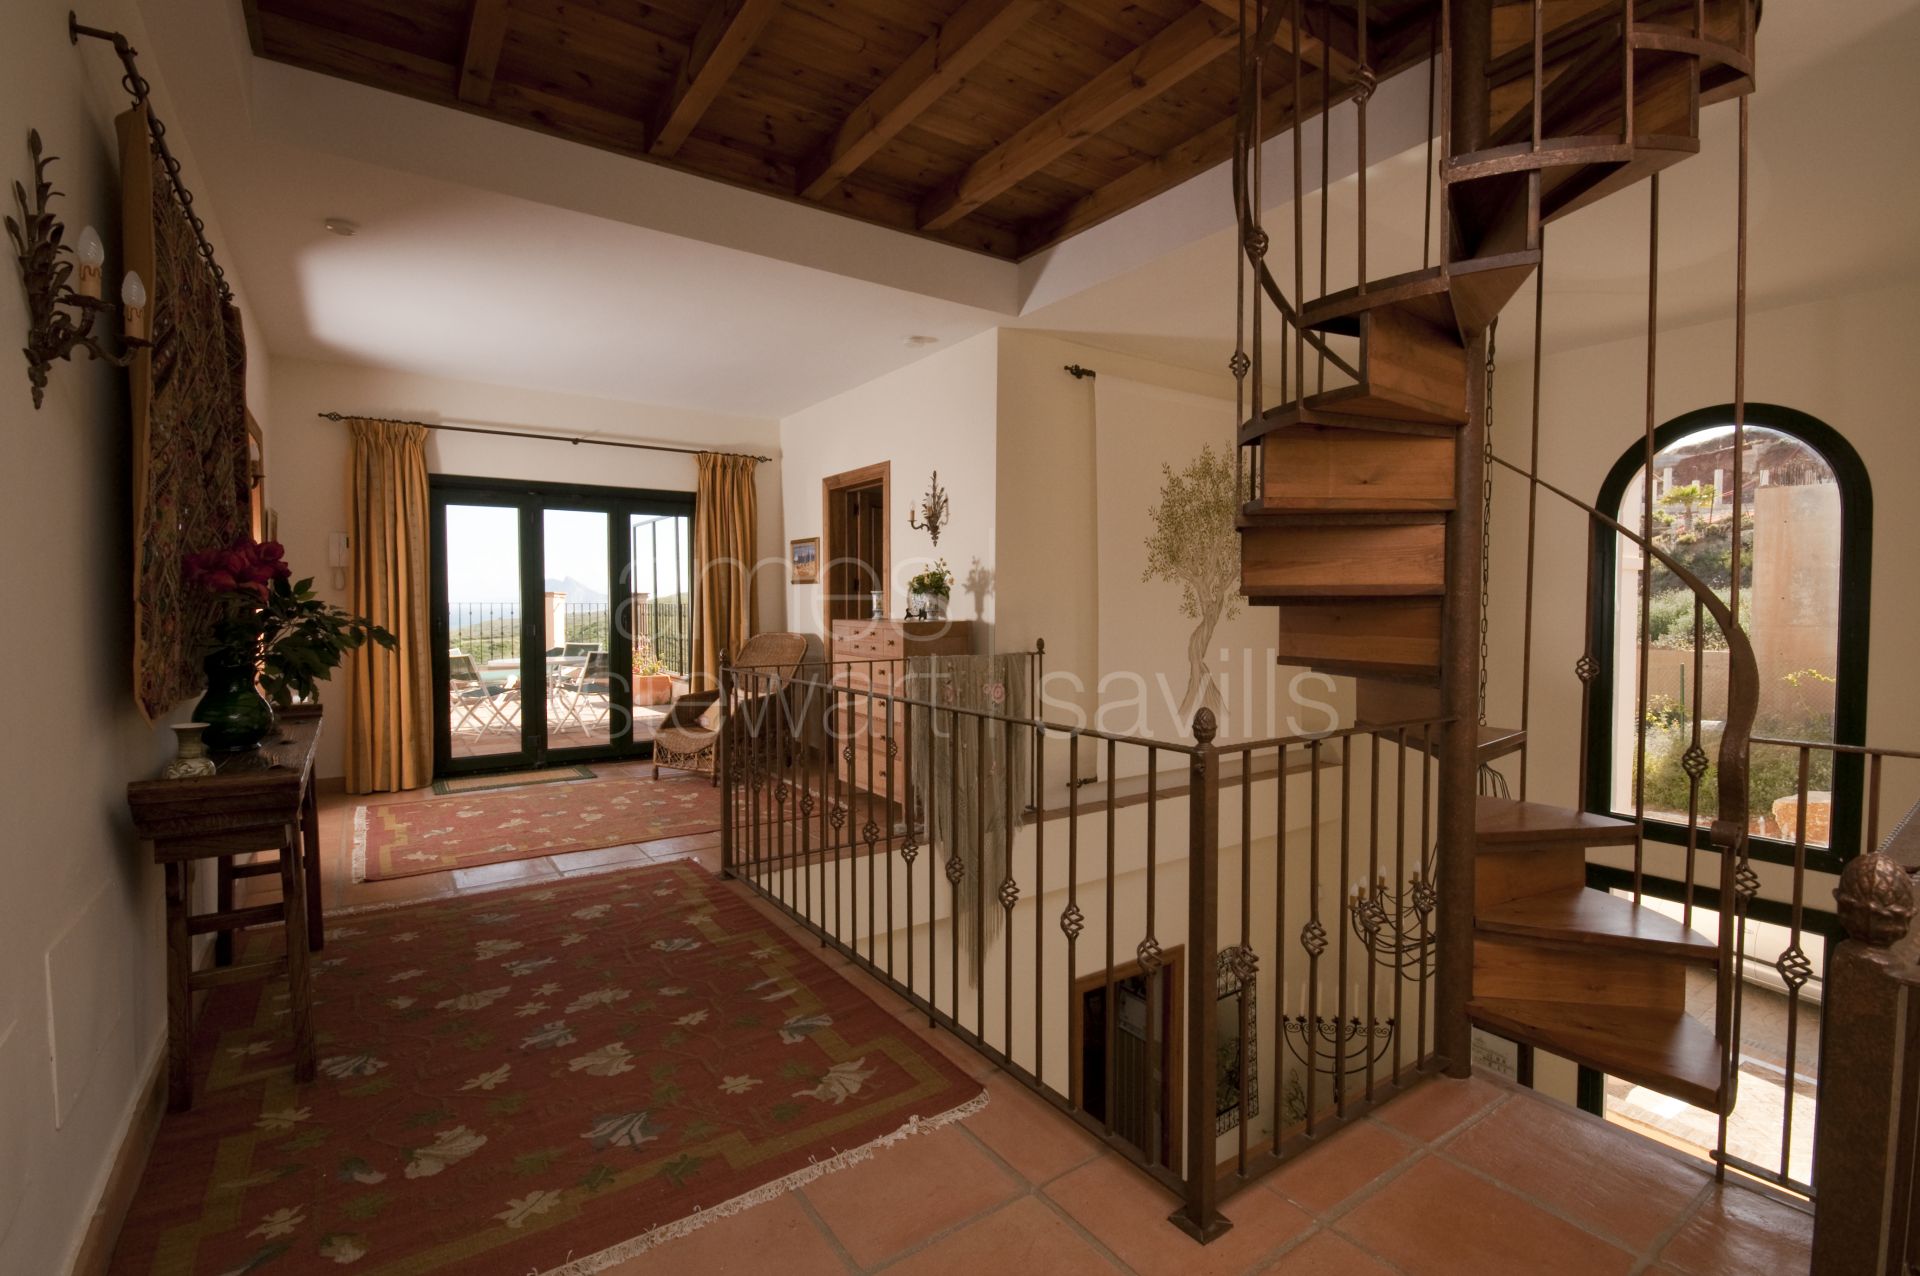 Wonderful Andaluz style villa with truly breathtaking views of the Mediterranean